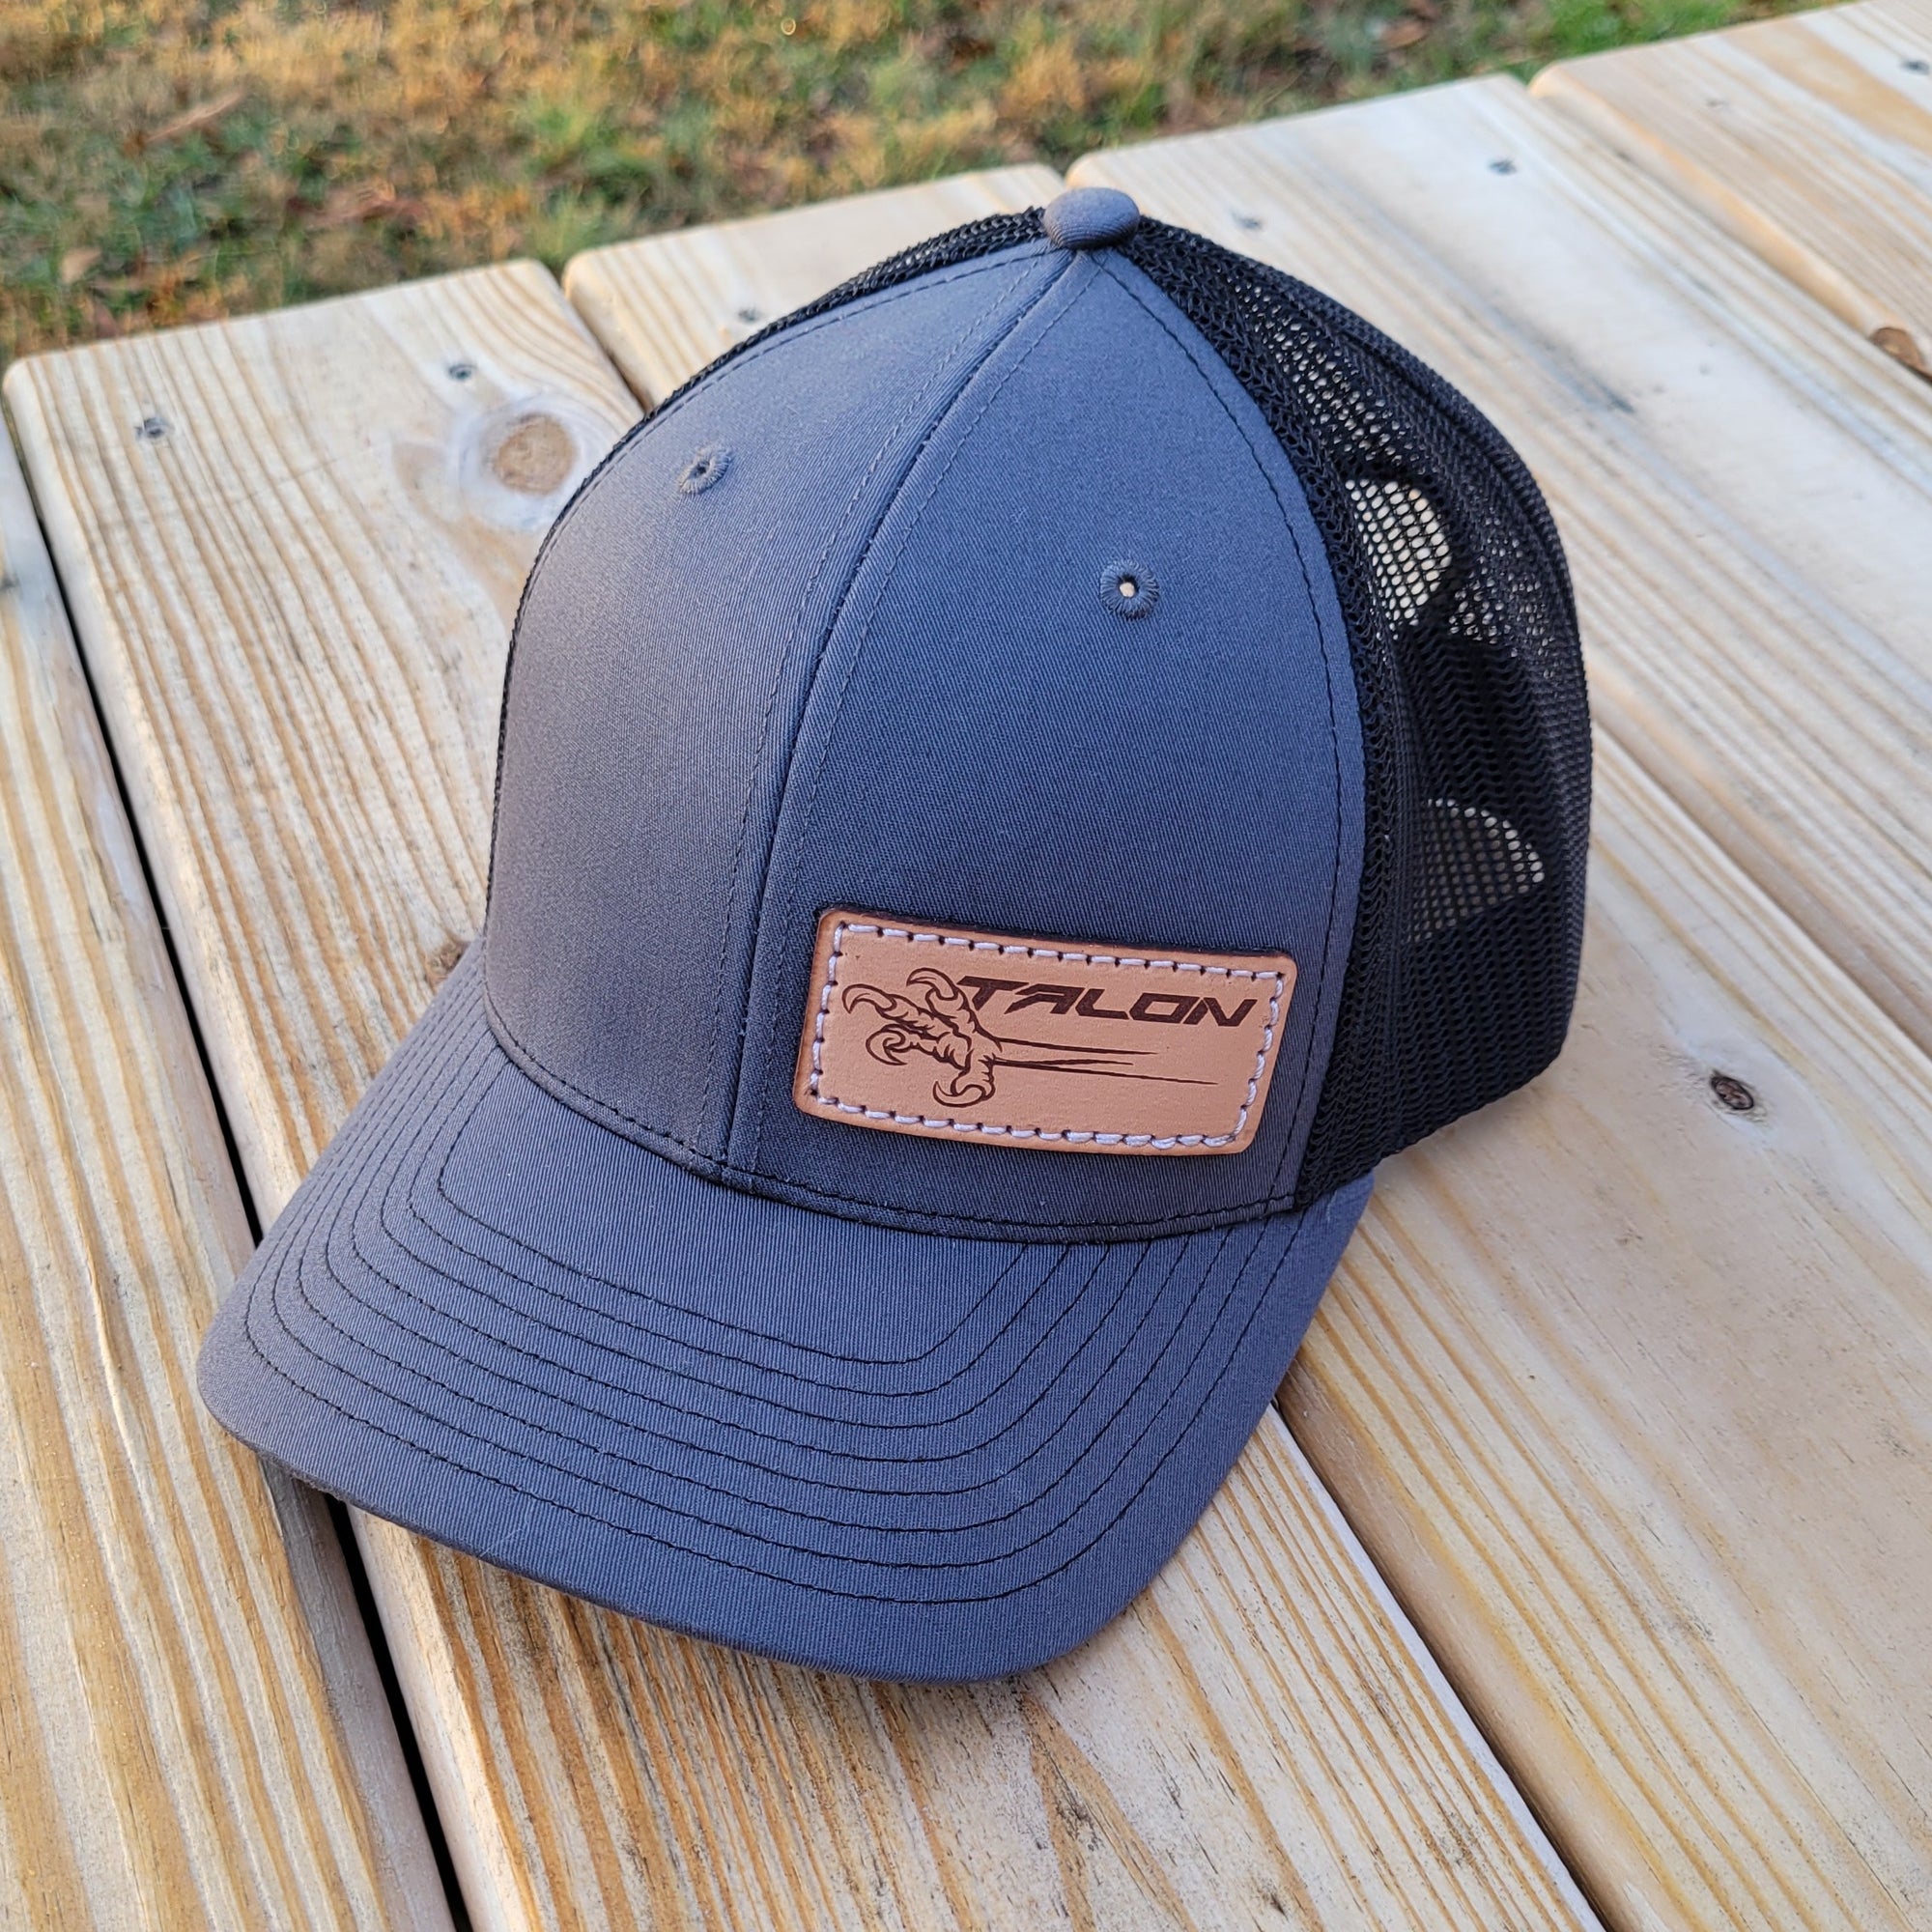 Talon Leather Badge Cap - NEW, Limited stock!